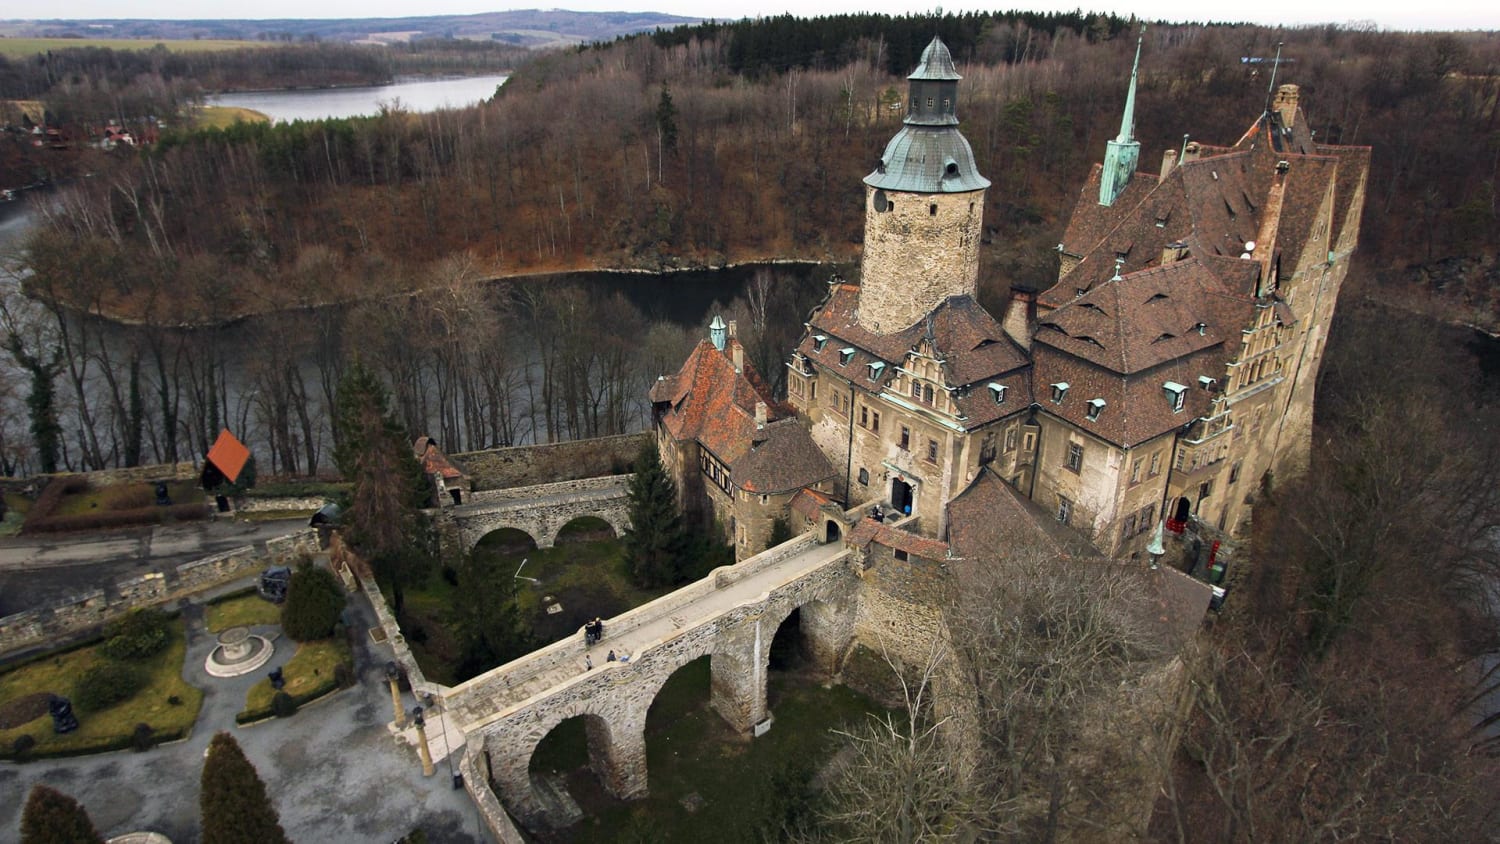 Czocha, Poland ,Dolnośląskie, Niederschlesien, a medieval fortress at the core, built at the crossroads of Czech, Polish and German settlement and confluence. The older part was built out as a residence buy a German industrialist from Dresden around 1905 in historical style.